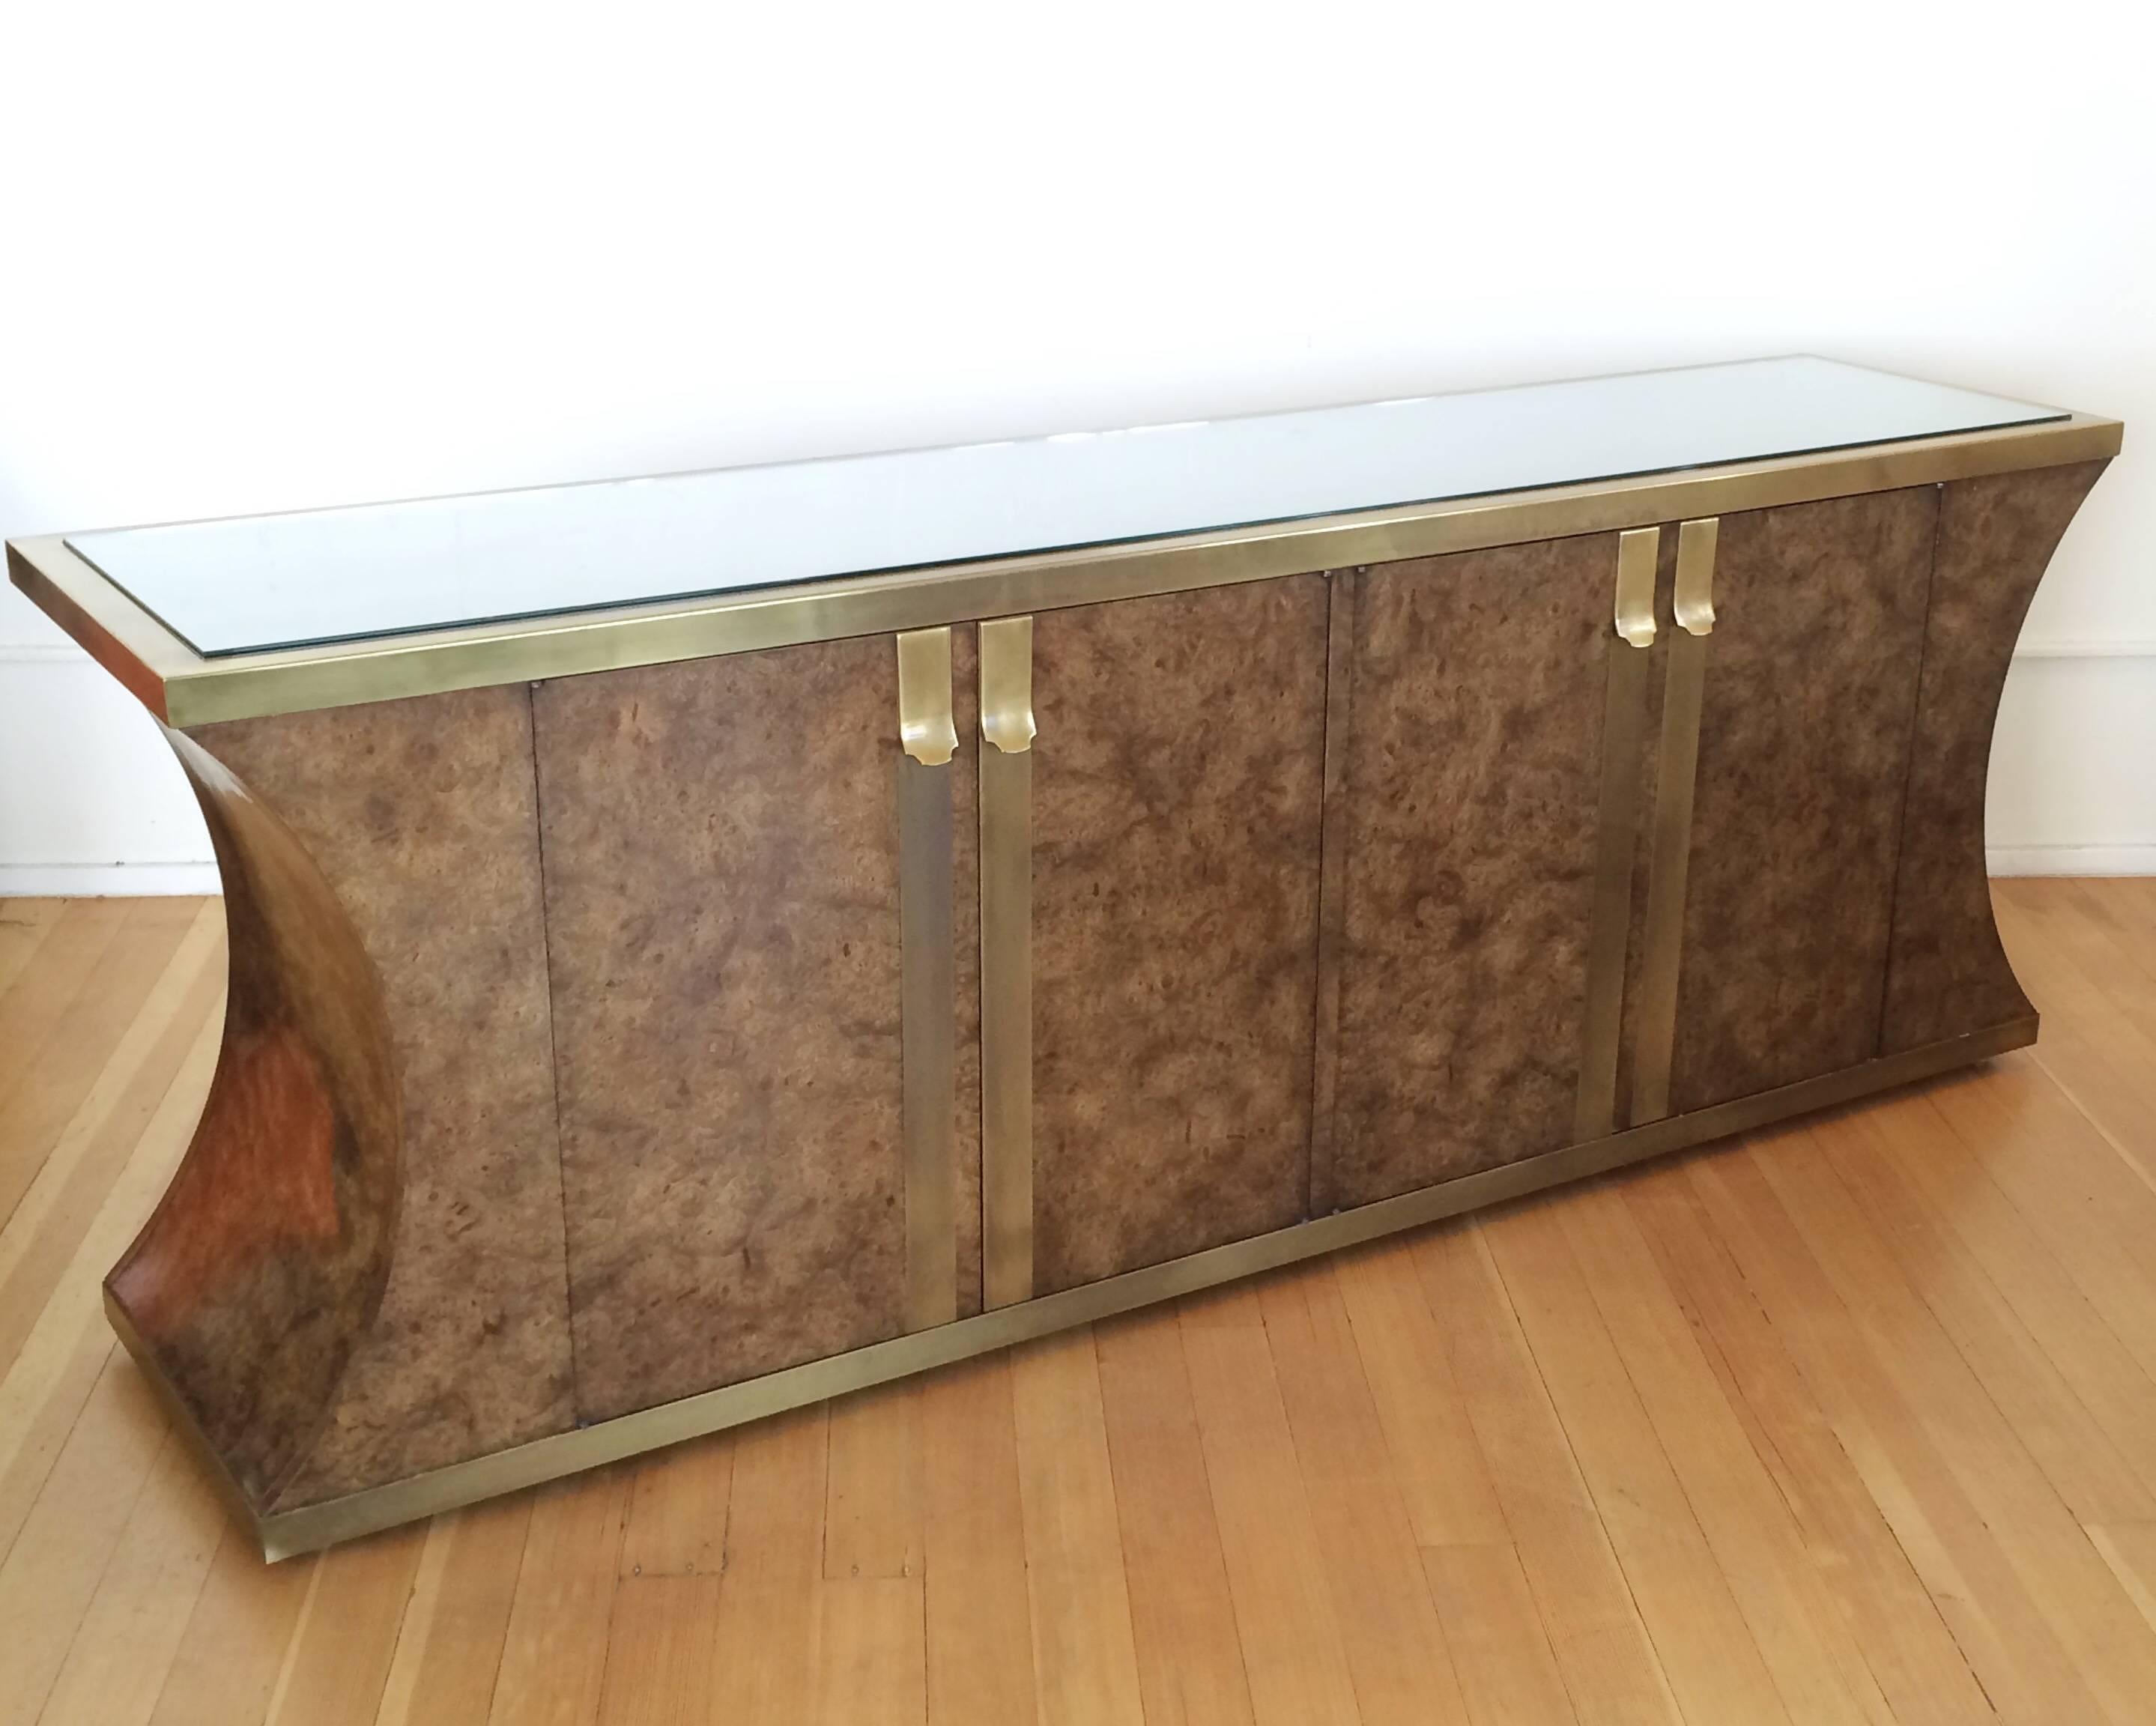 Dark Burlwood credenza framed with aged brass at the top and bottom. 
Also has aged brass pulls and strips on the doors. 
Inside has four drawers on one side and one adjustable shelf on the other. 
New 1/4